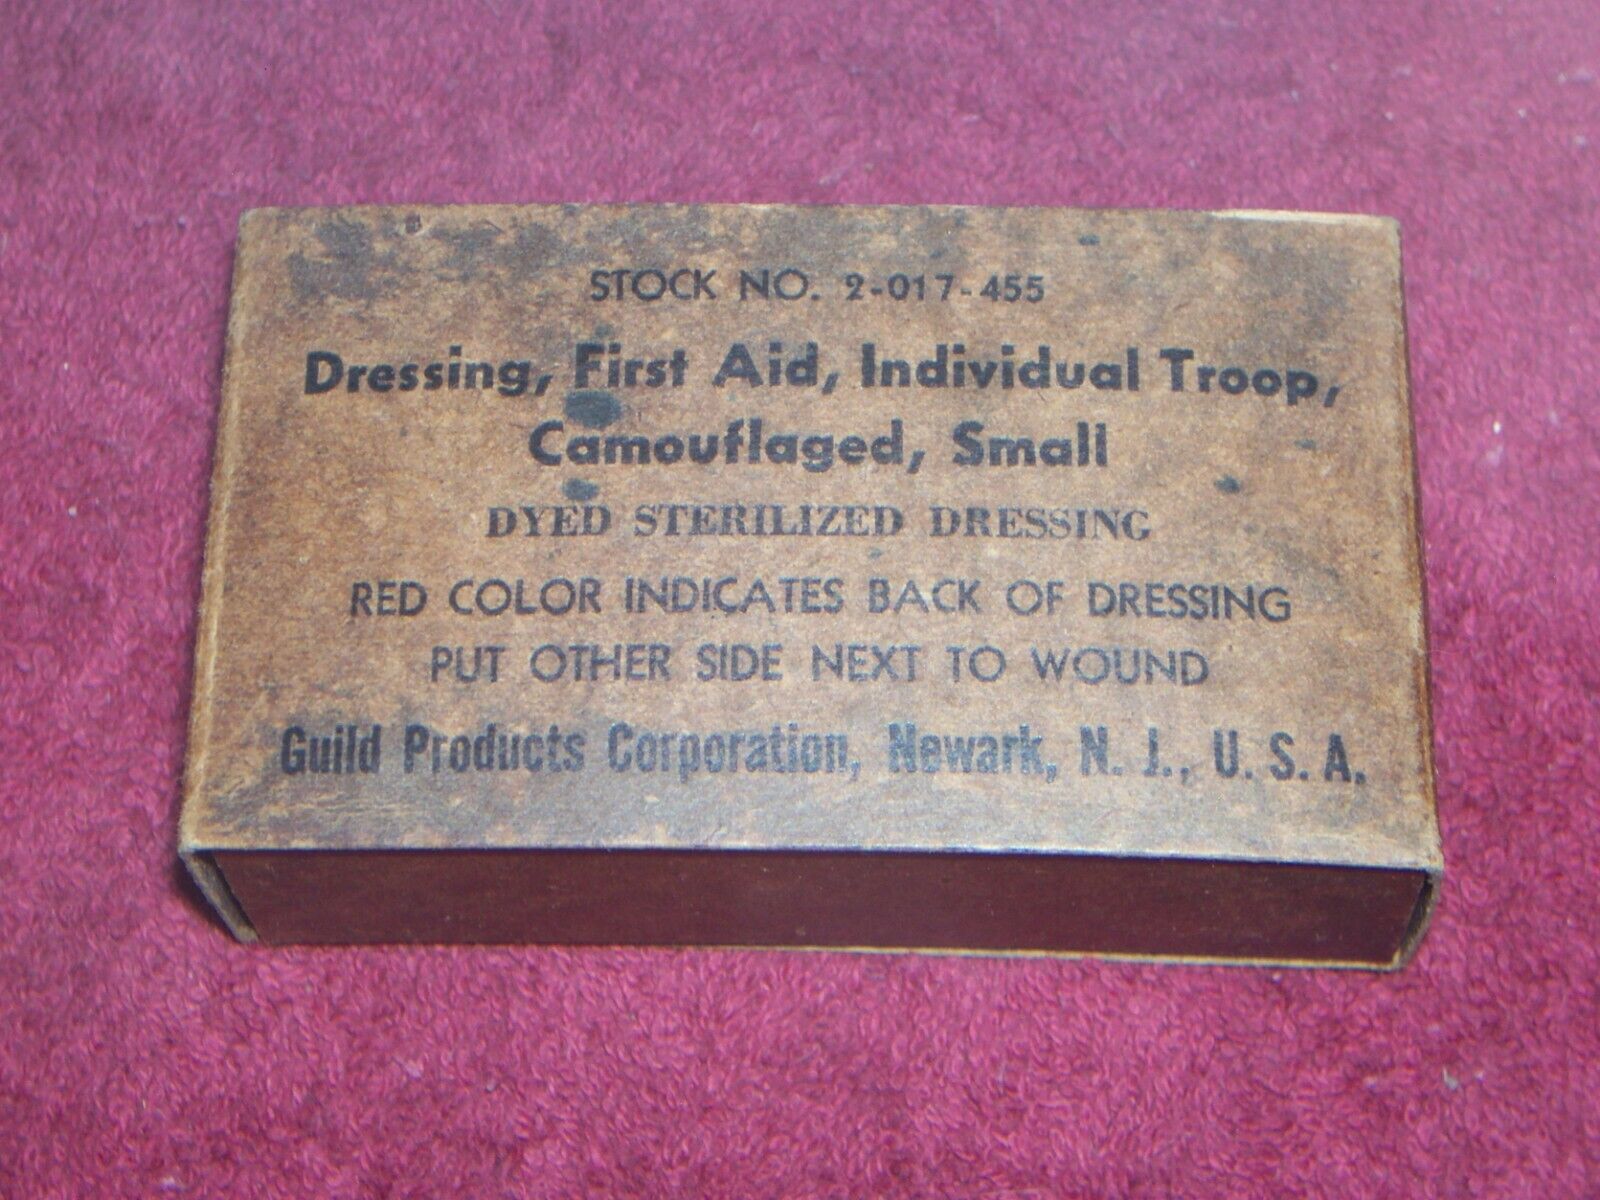  ORIG. WW II FIRST AID DRESSING BANDAGE INDIVIDUA L TROOP CAMOUFLAGED, SMALL